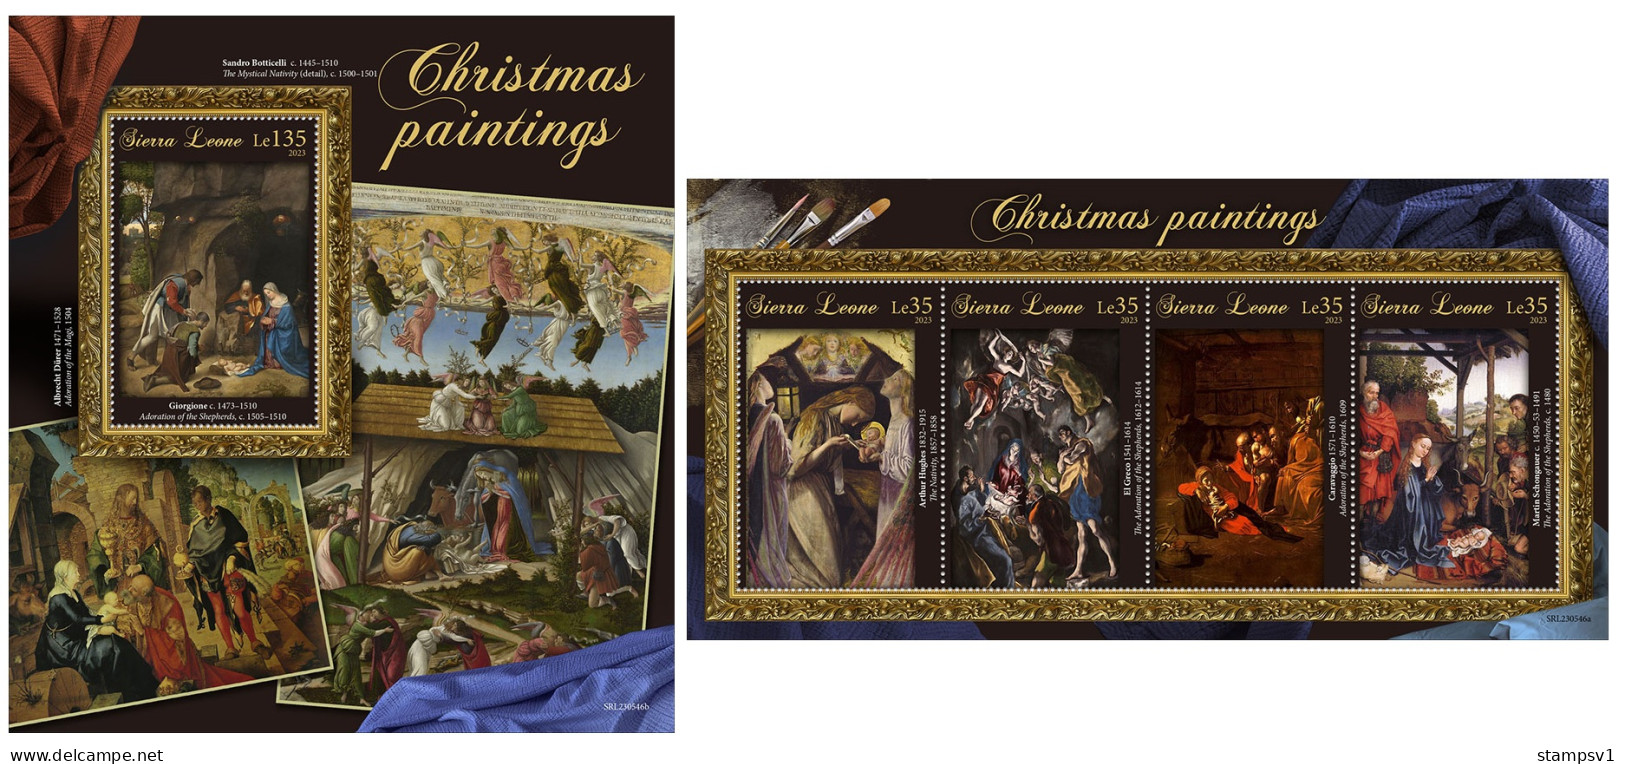 Sierra Leone  2023 Christmas Paintings. (546) OFFICIAL ISSUE - Religious